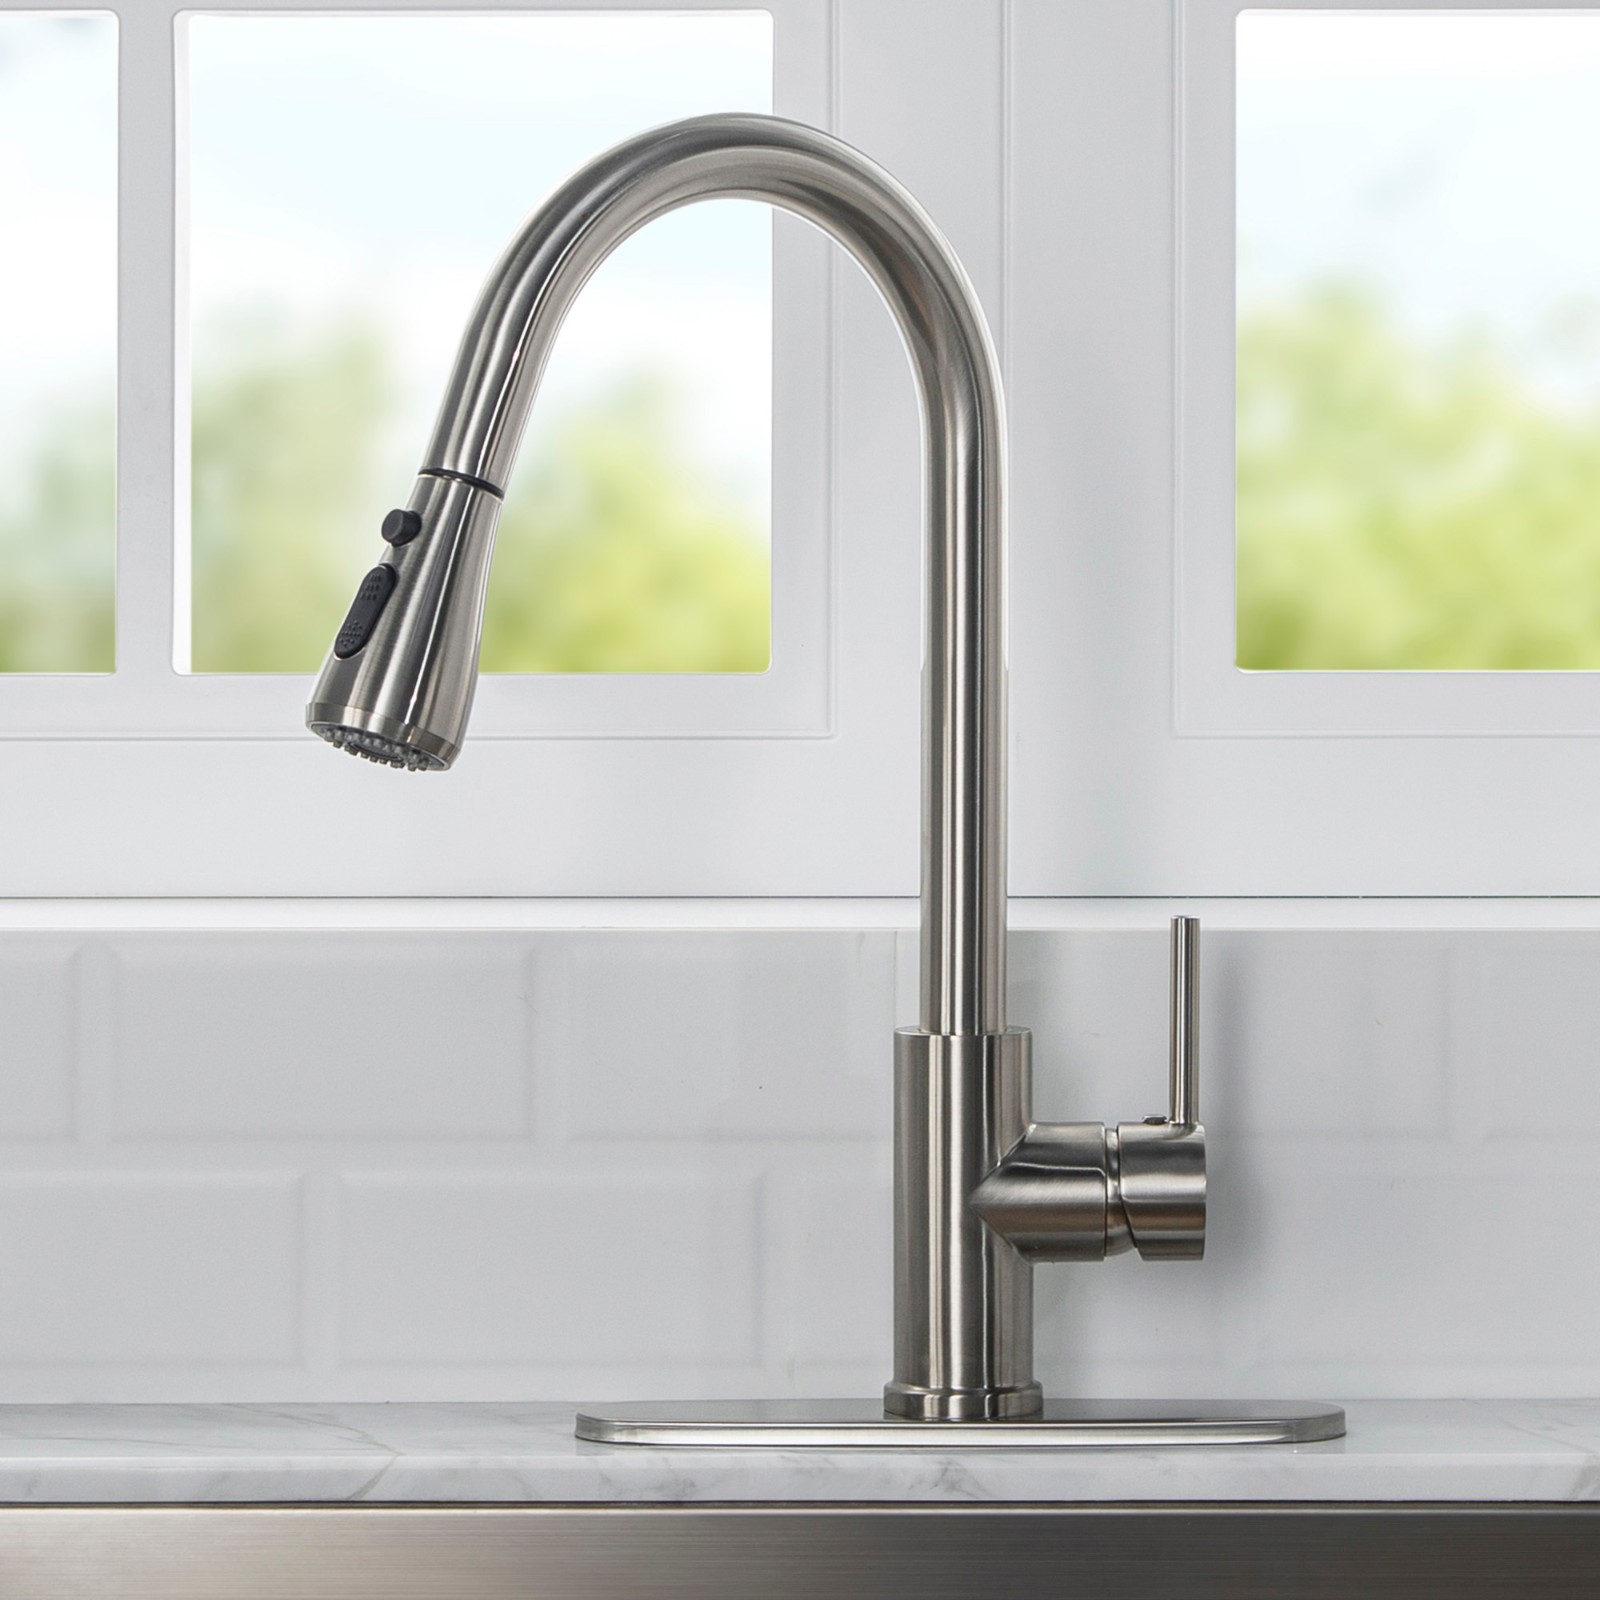  WOODBRIDGE WK090802BN Single Handle Pull Down Kitchen Faucet in Brushed Nickel Finish_5012